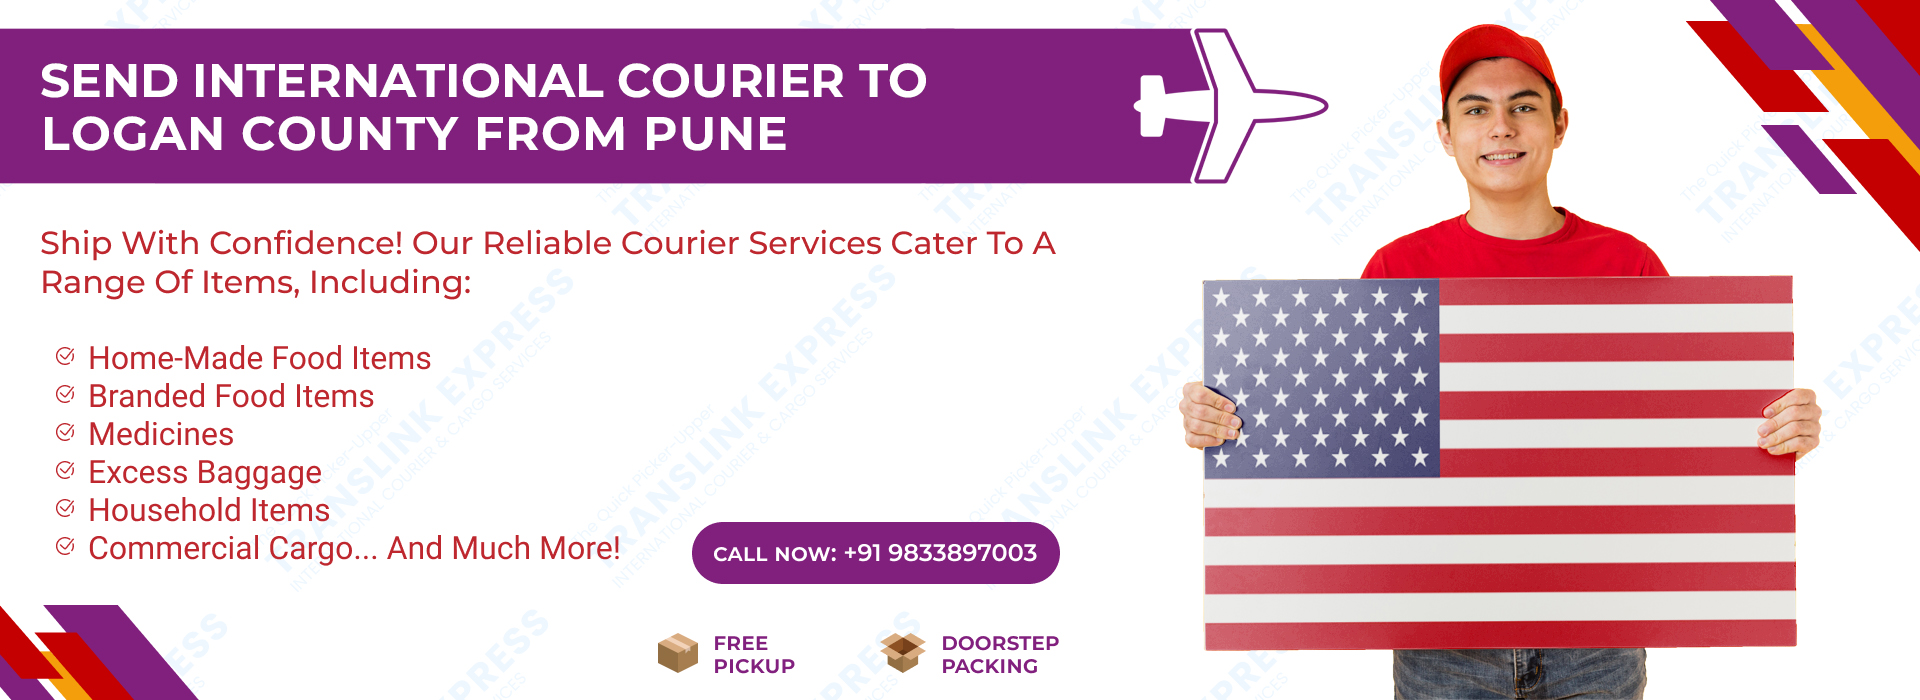 Courier to Logan County From Pune